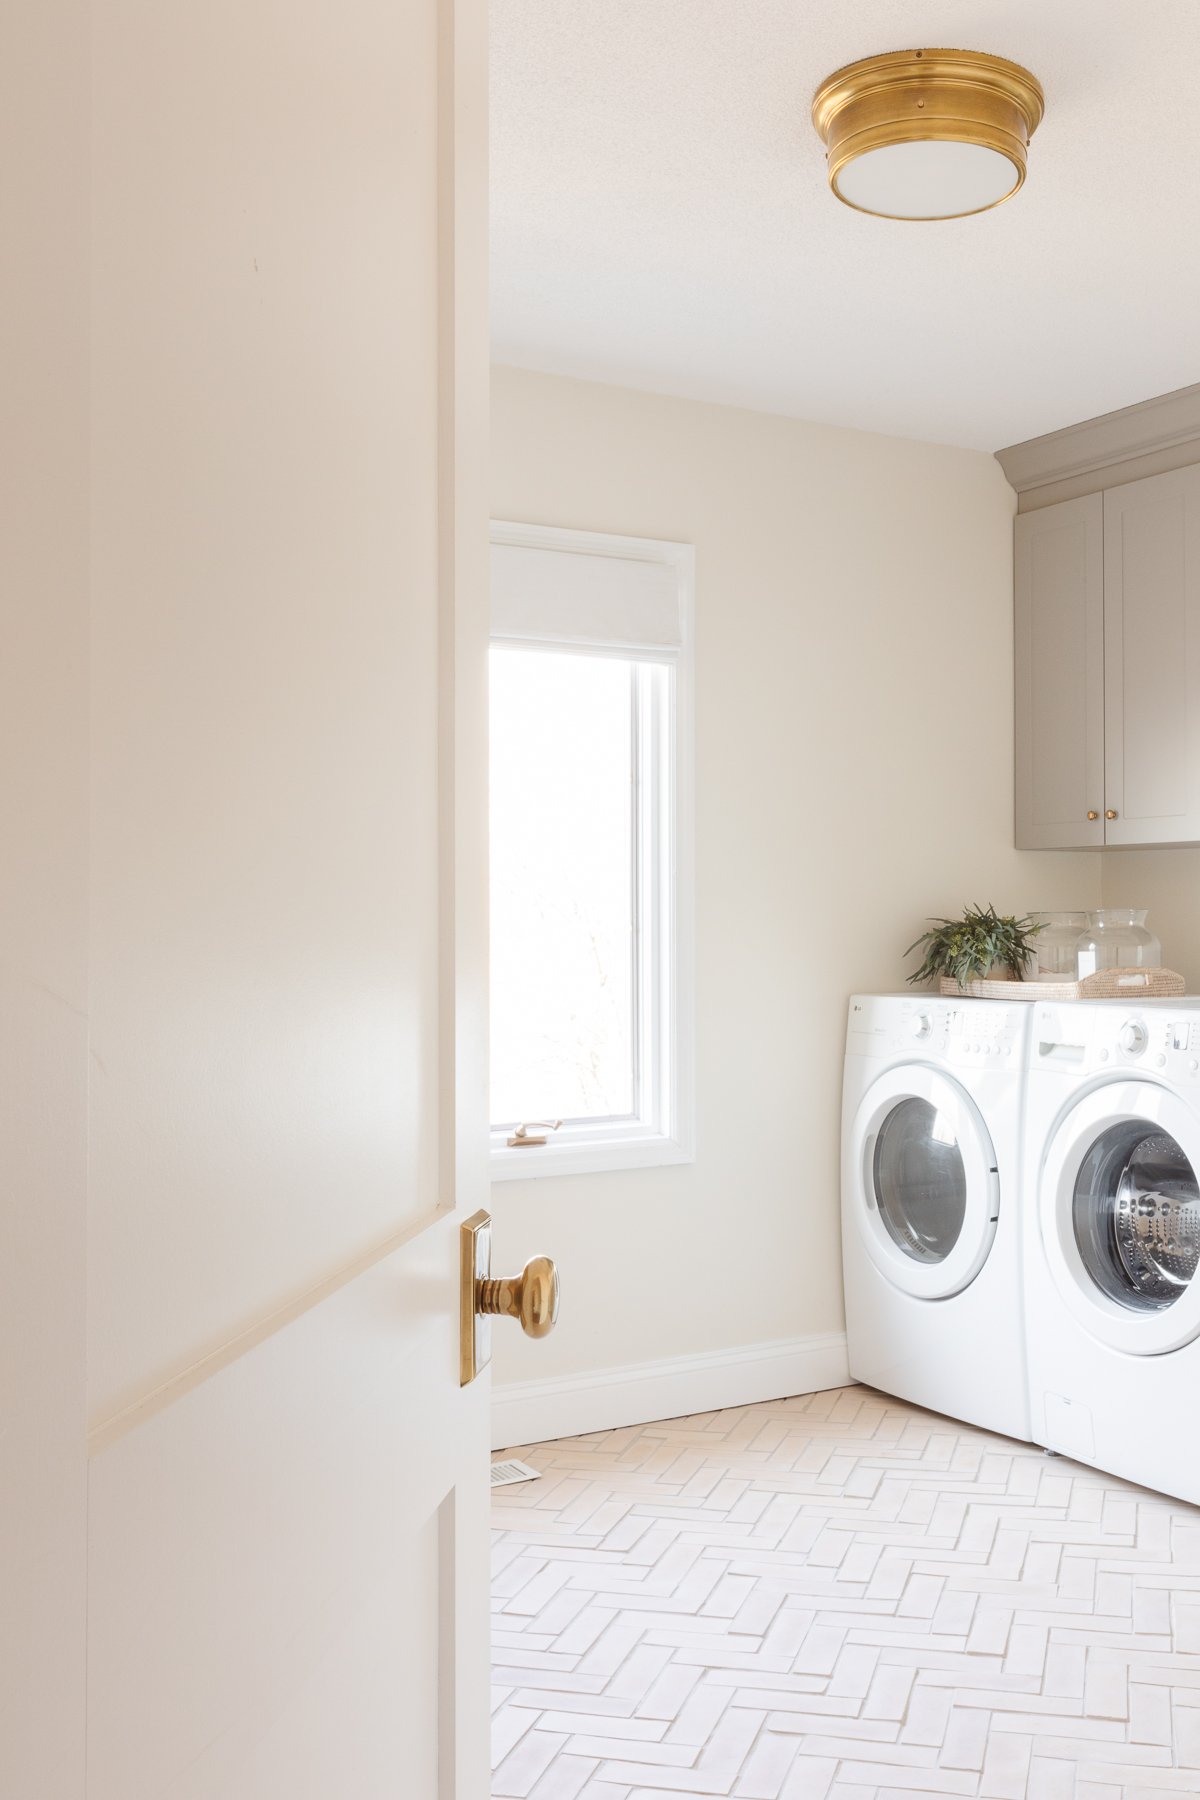 A laundry room with shaker style doors on the washer and dryer units.